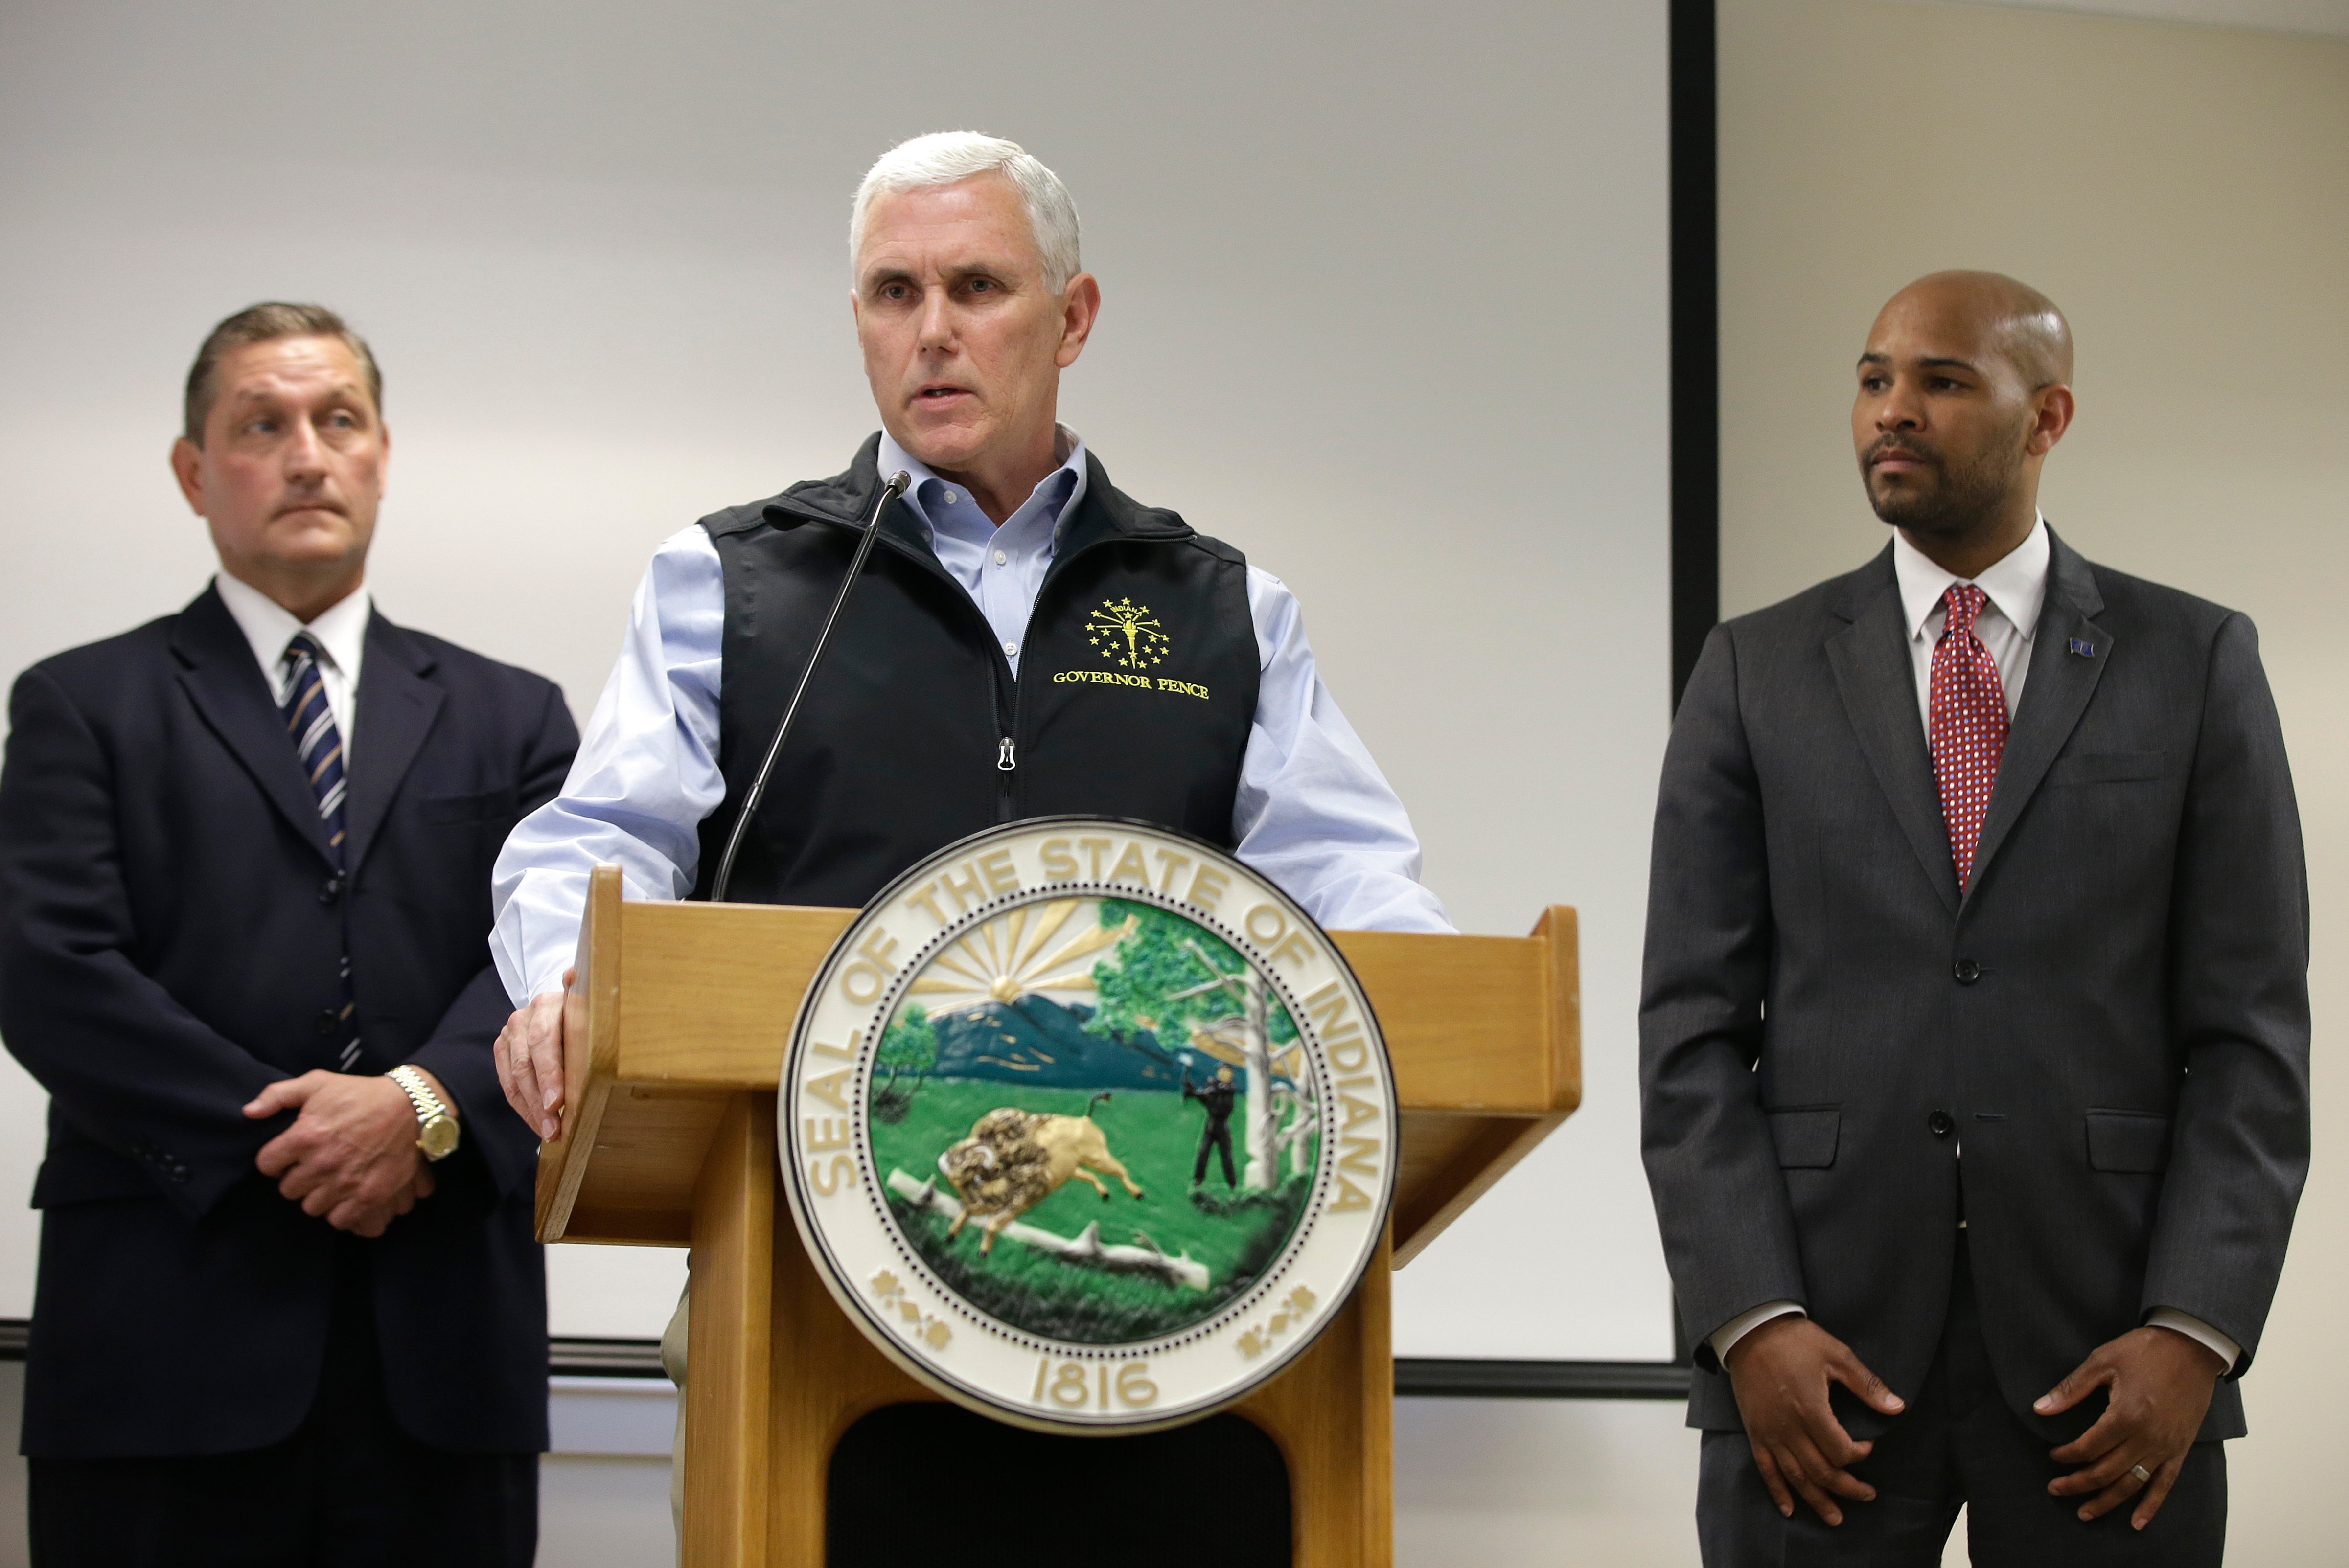 Indiana Gov. Mike Pence responds to a question during a news conference, March 25, 2015, in Scottsburg, Ind. (Darron Cummings—AP)